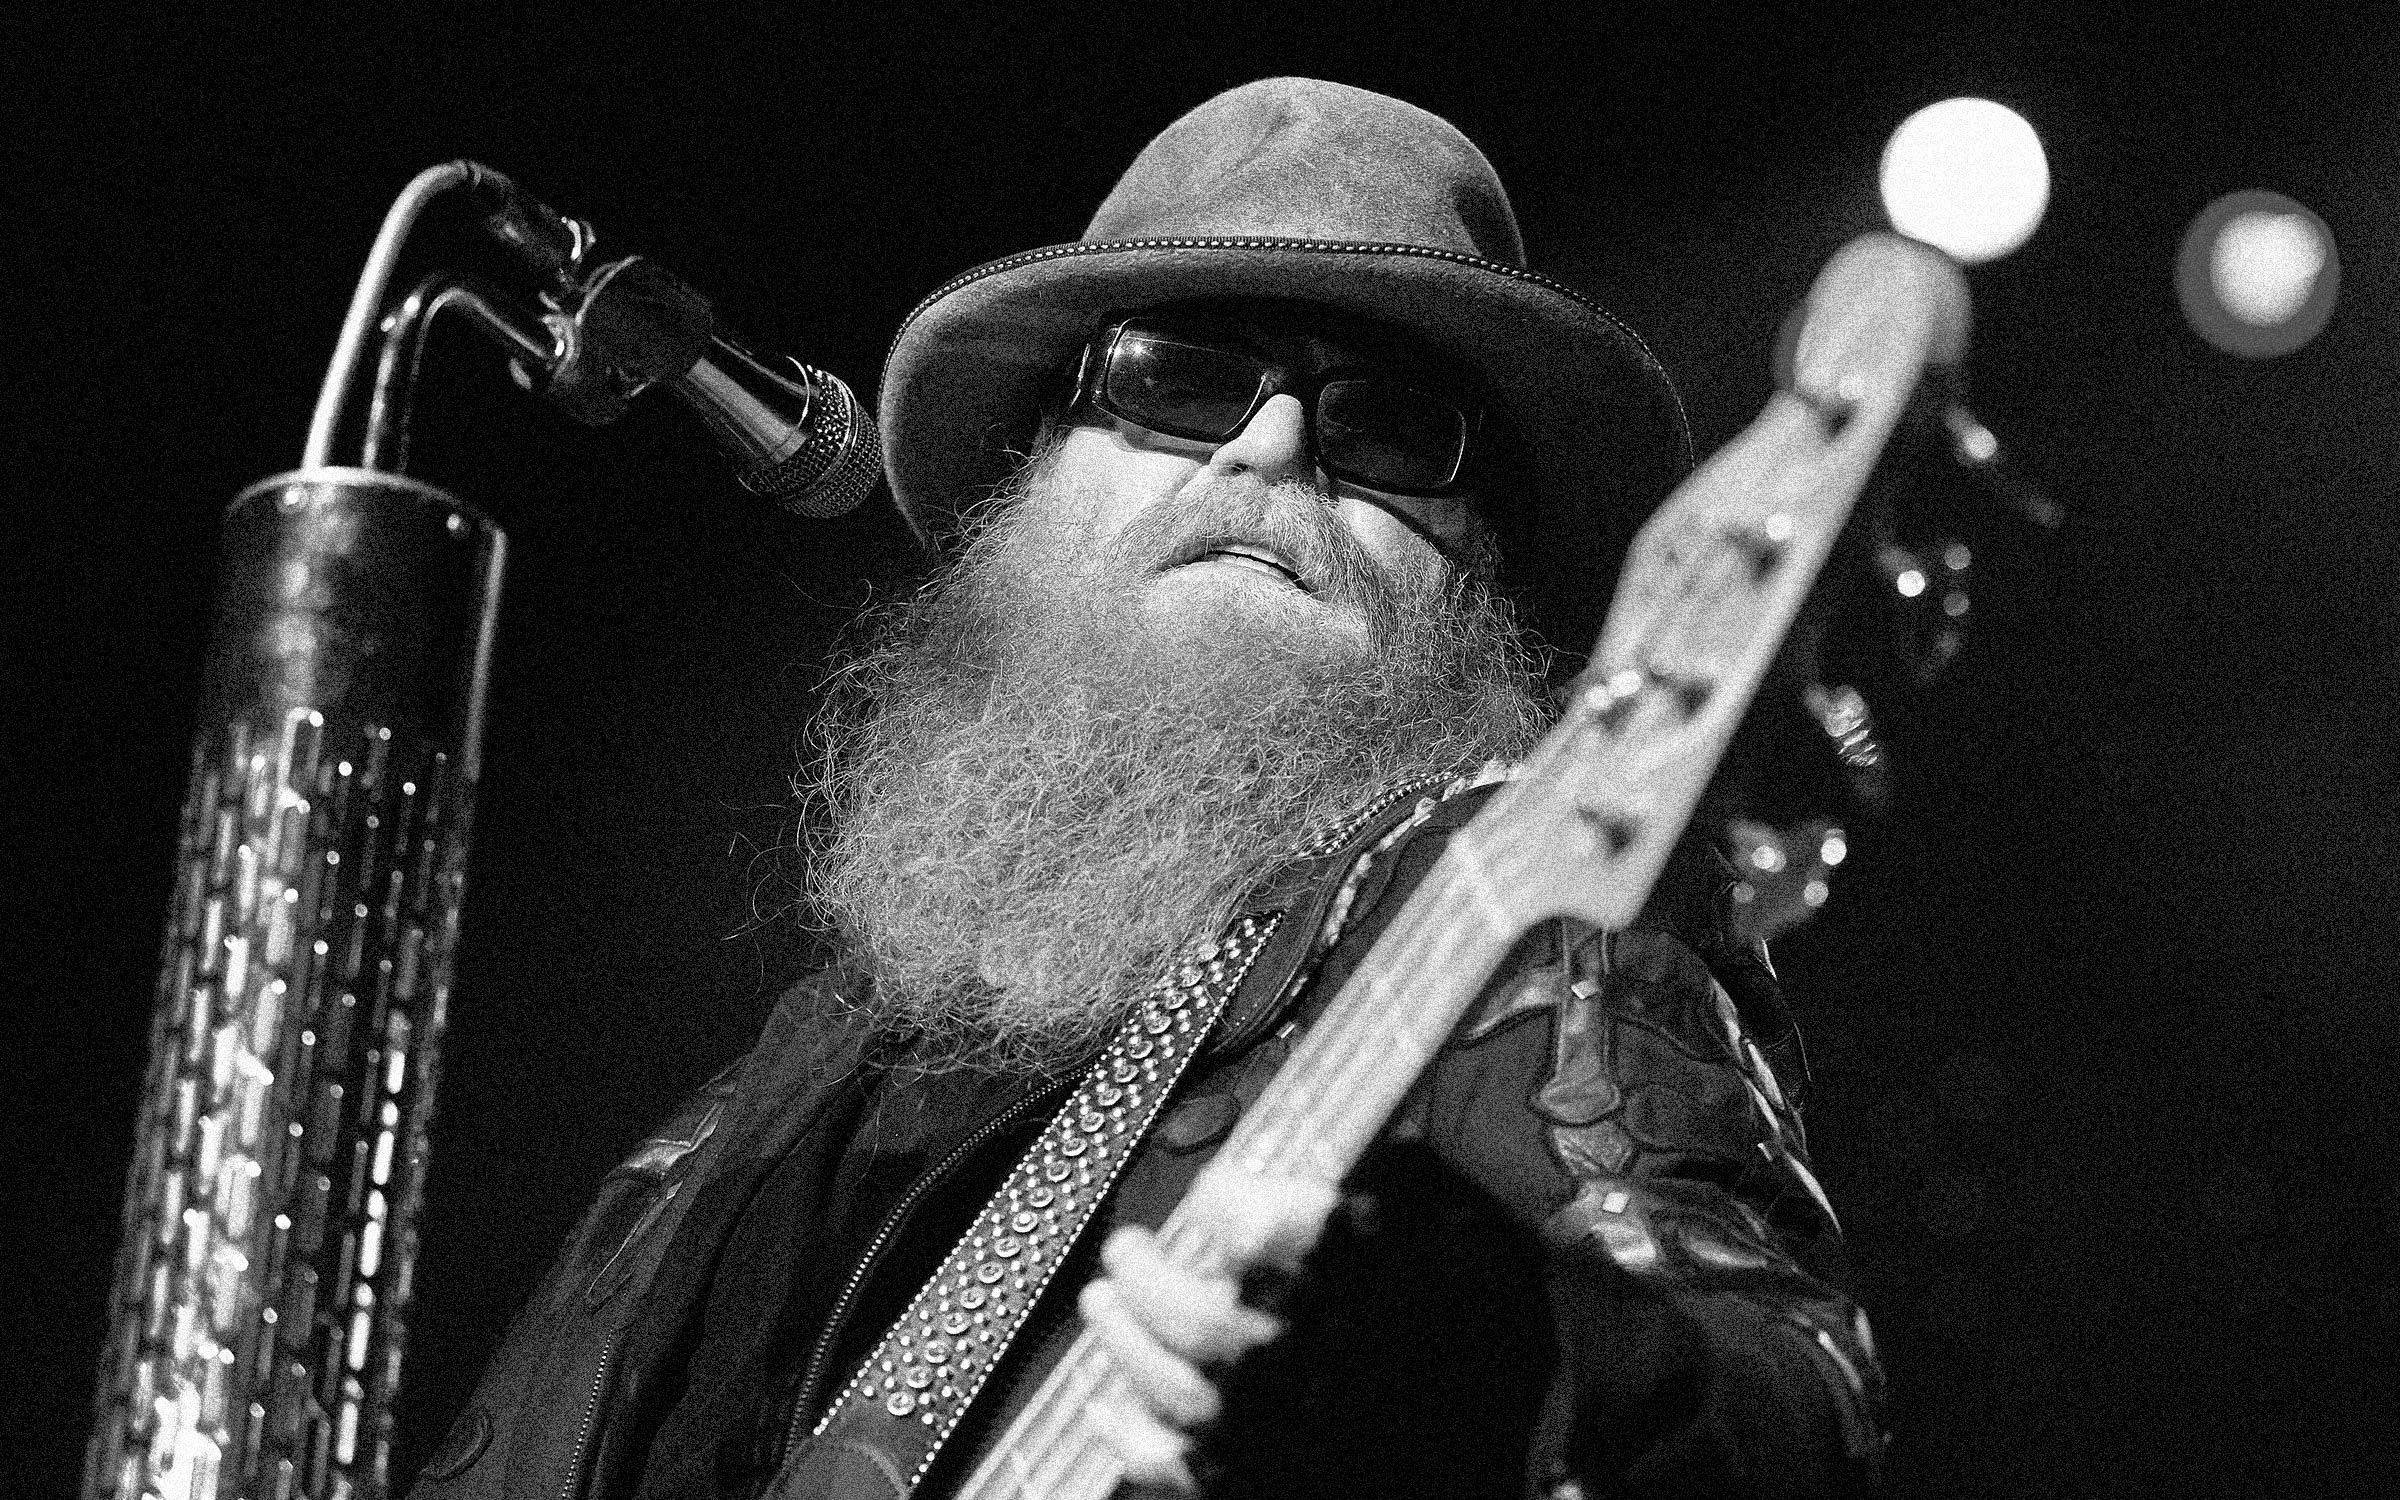 zz top greatest hits from around concert 2016